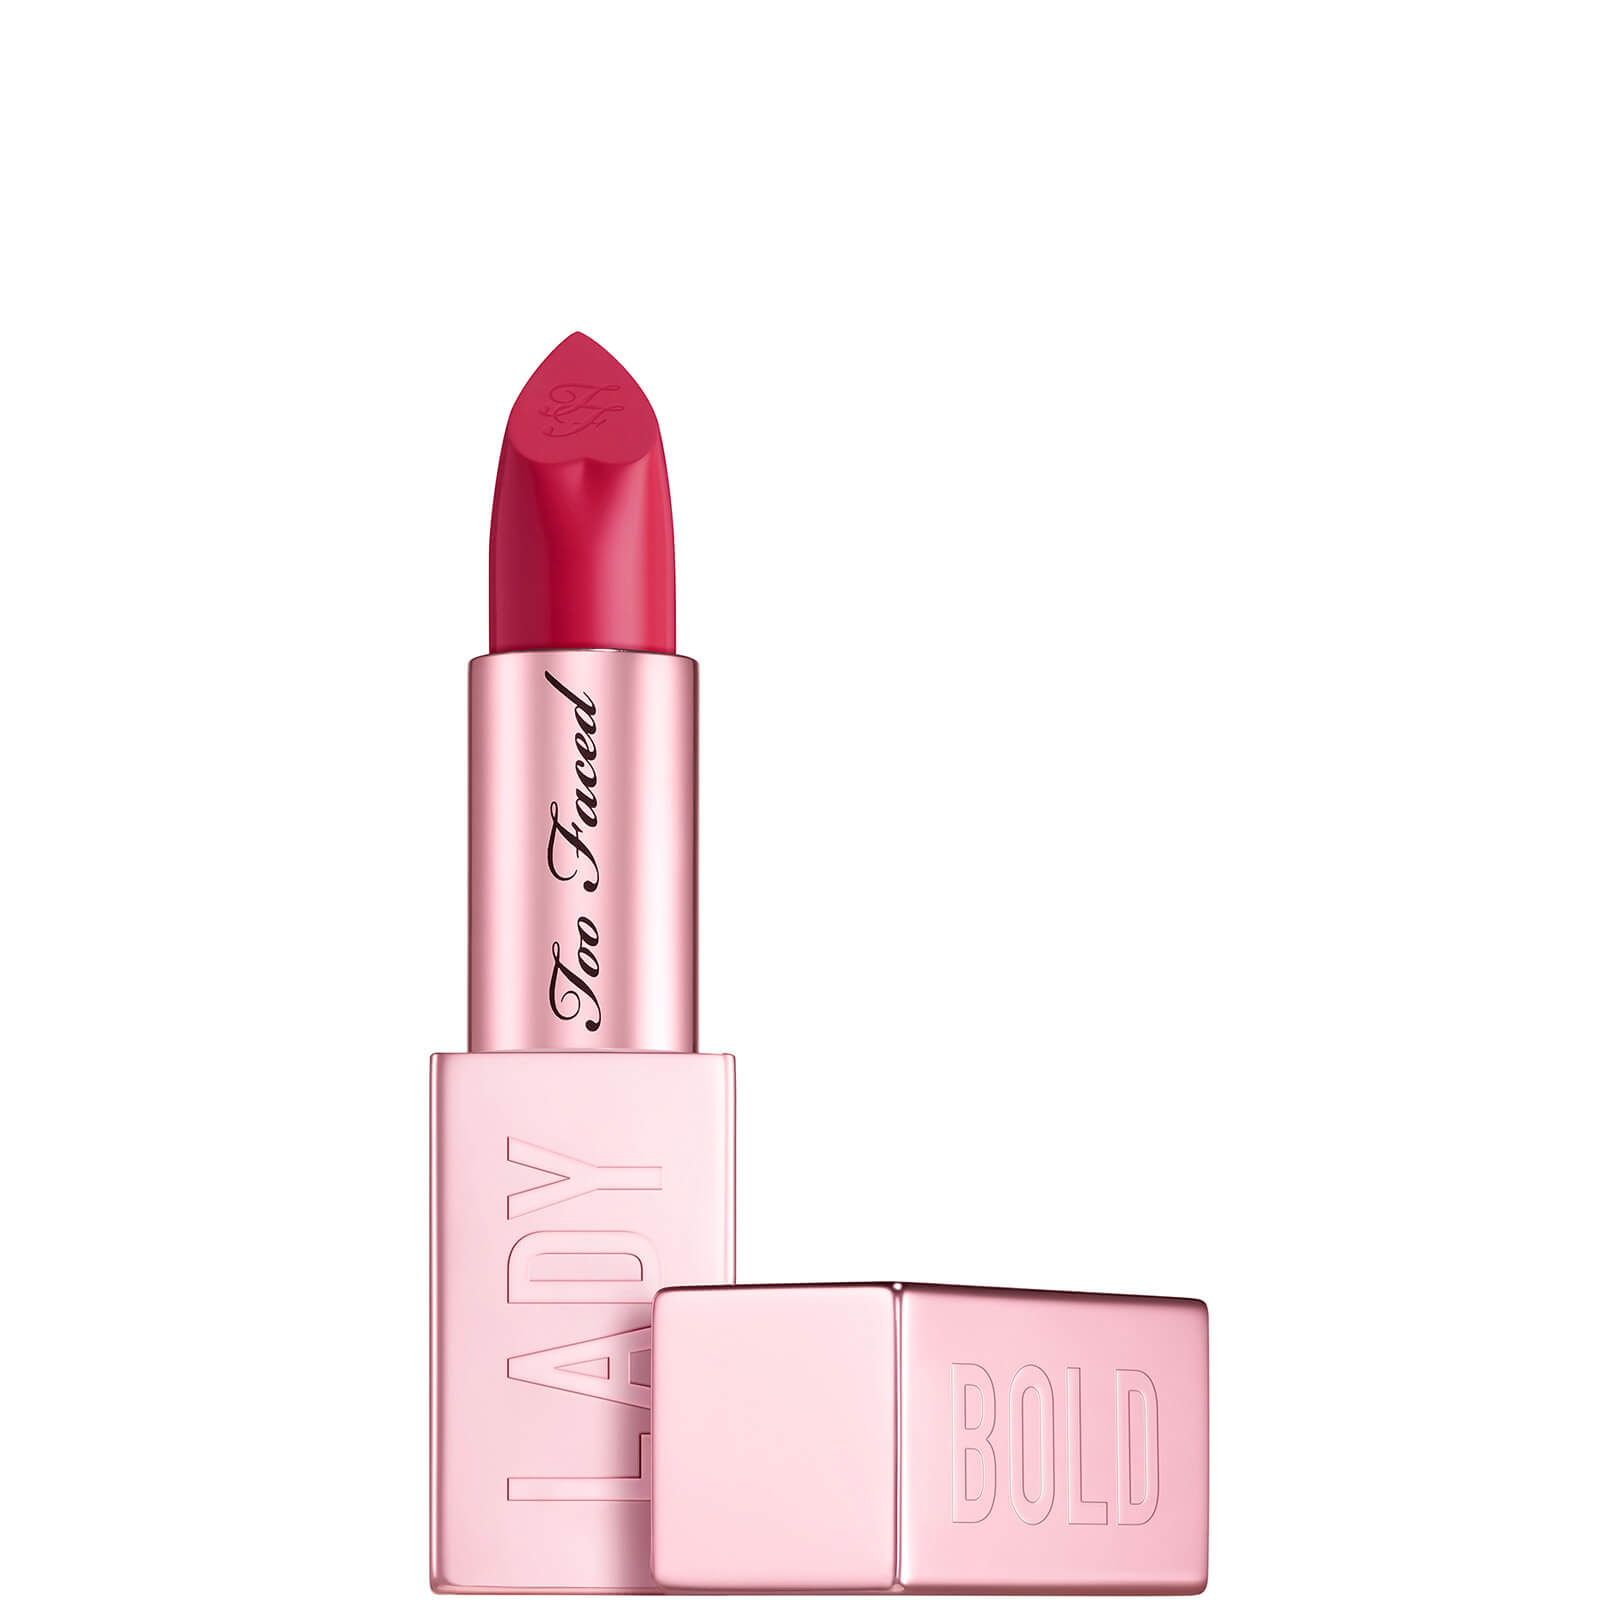 Too Faced Lady Bold Em-Power Pigment Lipstick 4g (Various Shades) - Rebel